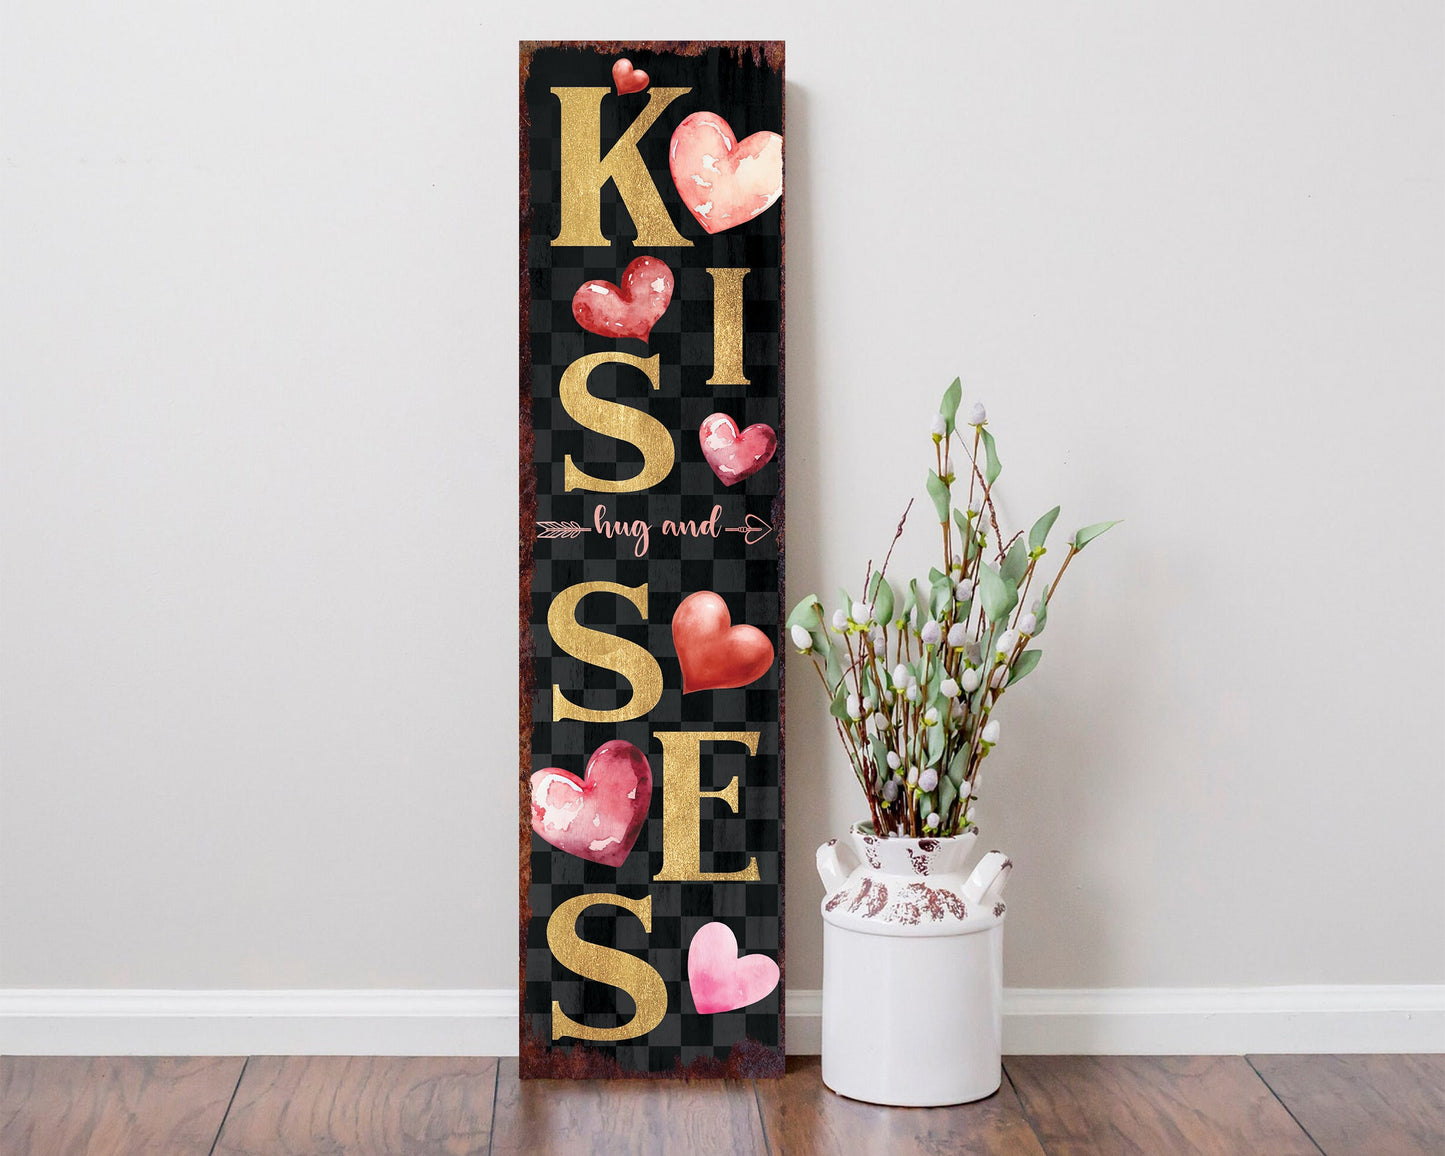 Vintage Valentine's Day Decor: 36-inch Hugs and Kisses Porch Sign